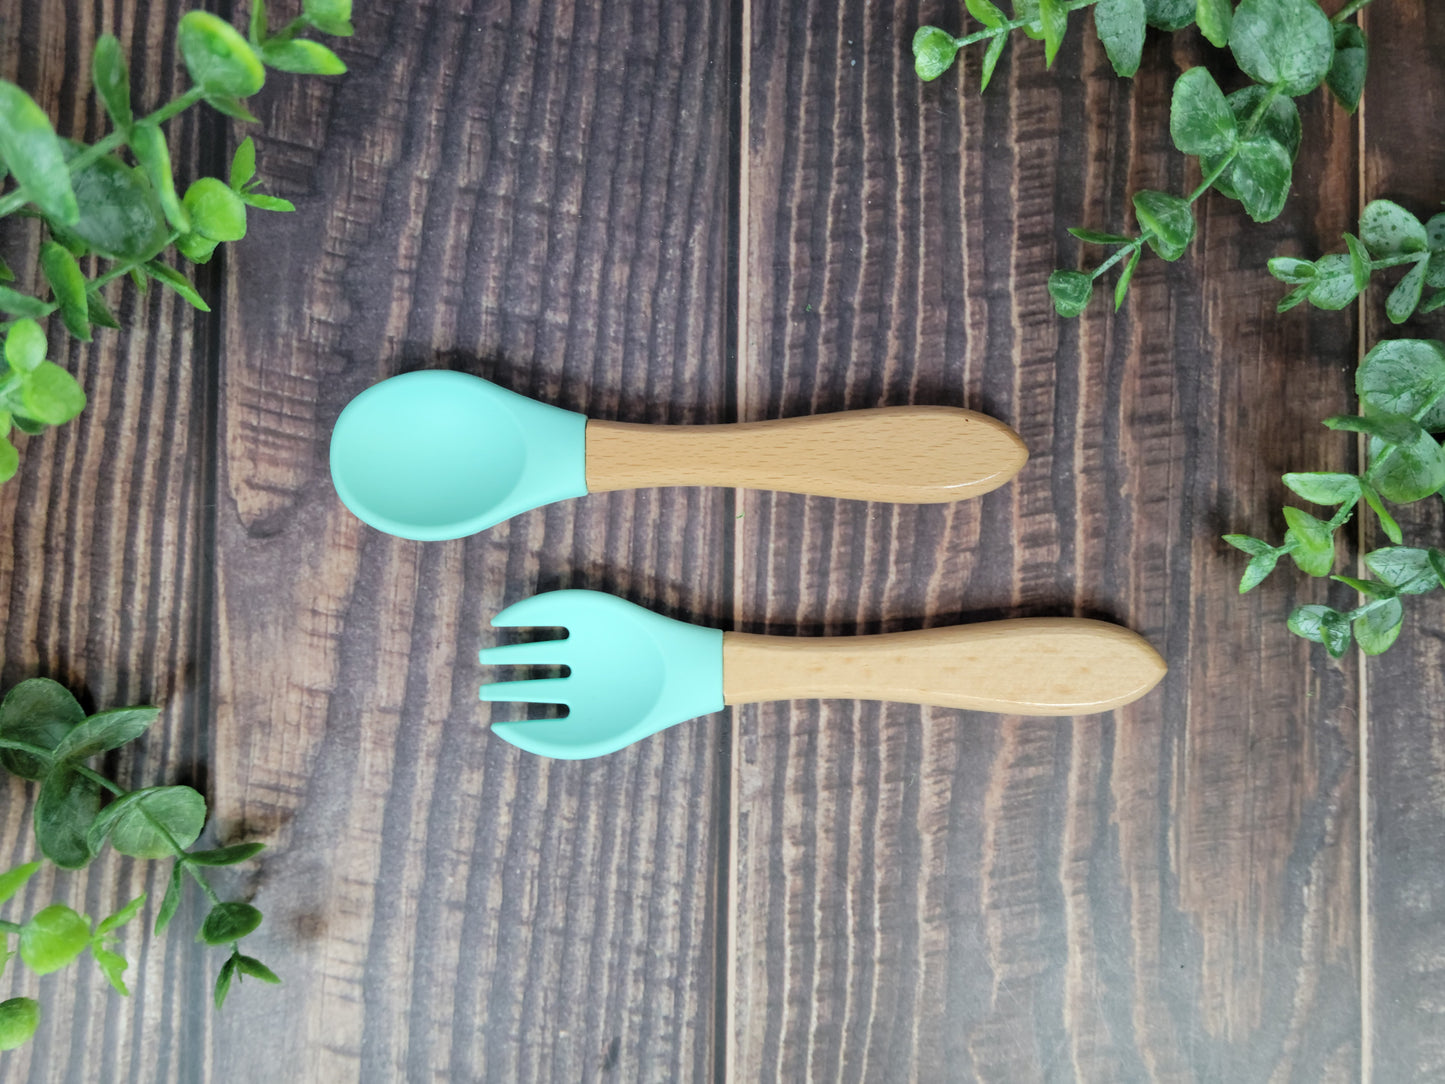 Fork & Spoon set, Silicone and wood handle silverware set, spoon and fork set, silverware for engraving, engraving blanks